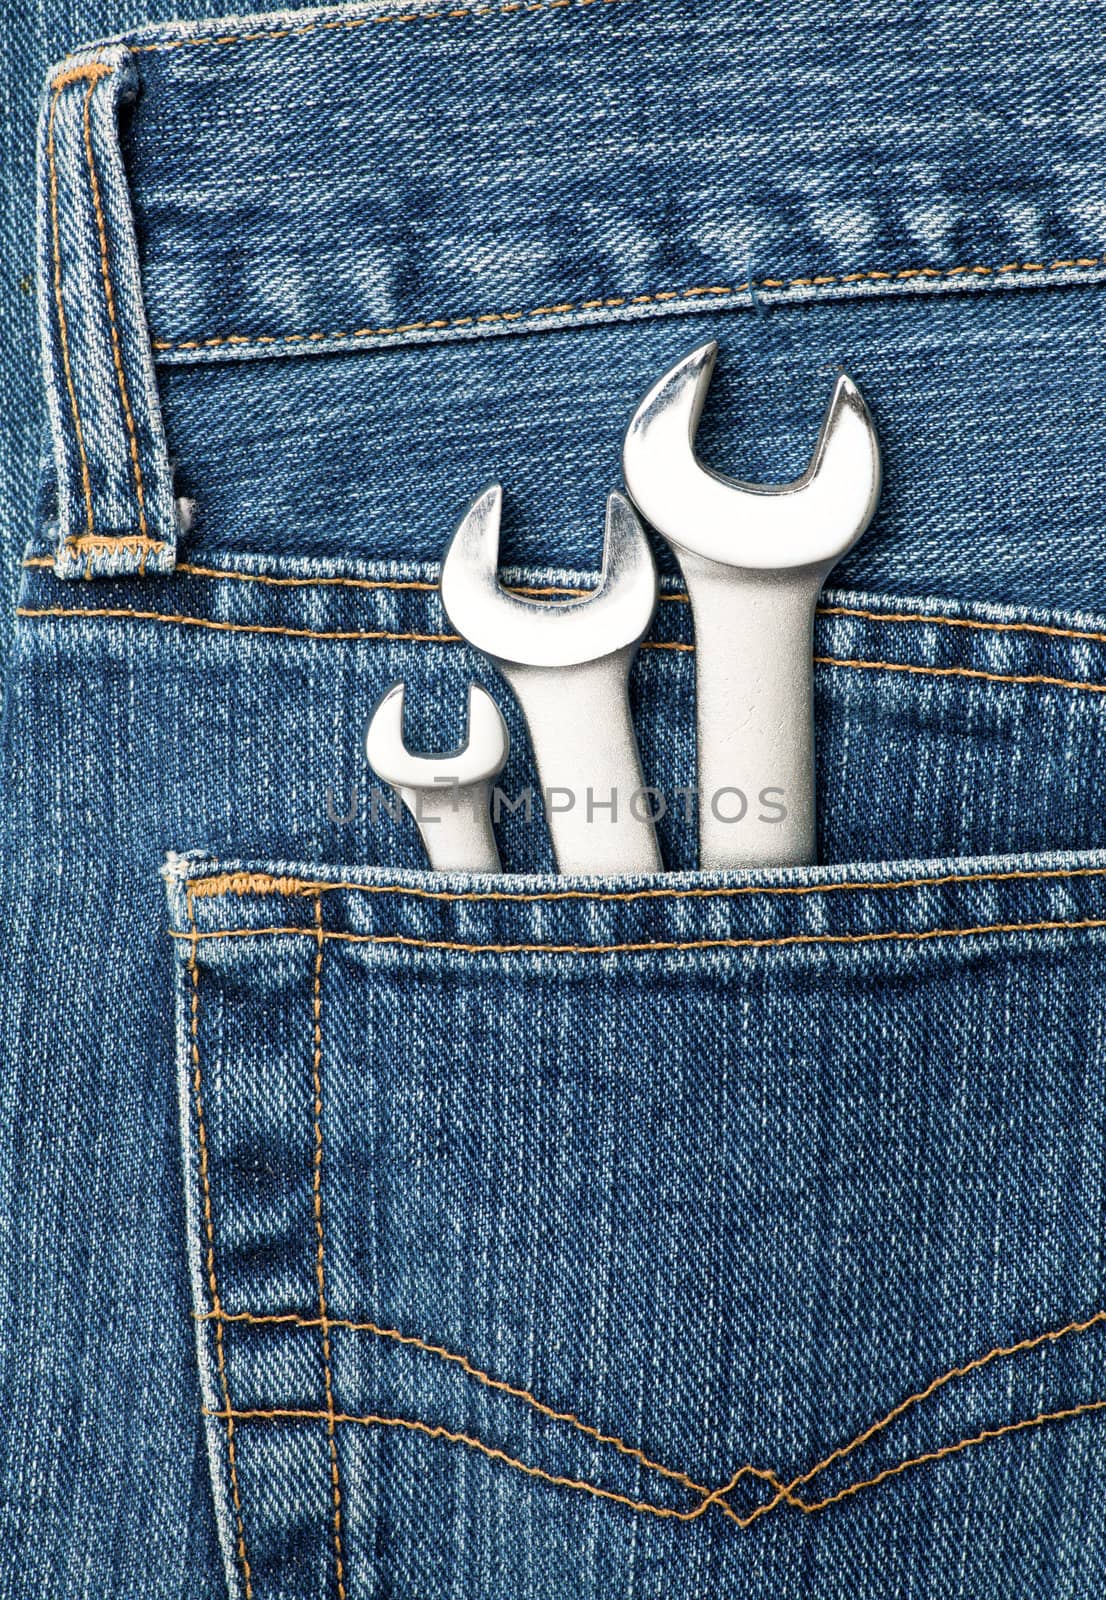 Blue jeans pocket with chrome lug wrenches